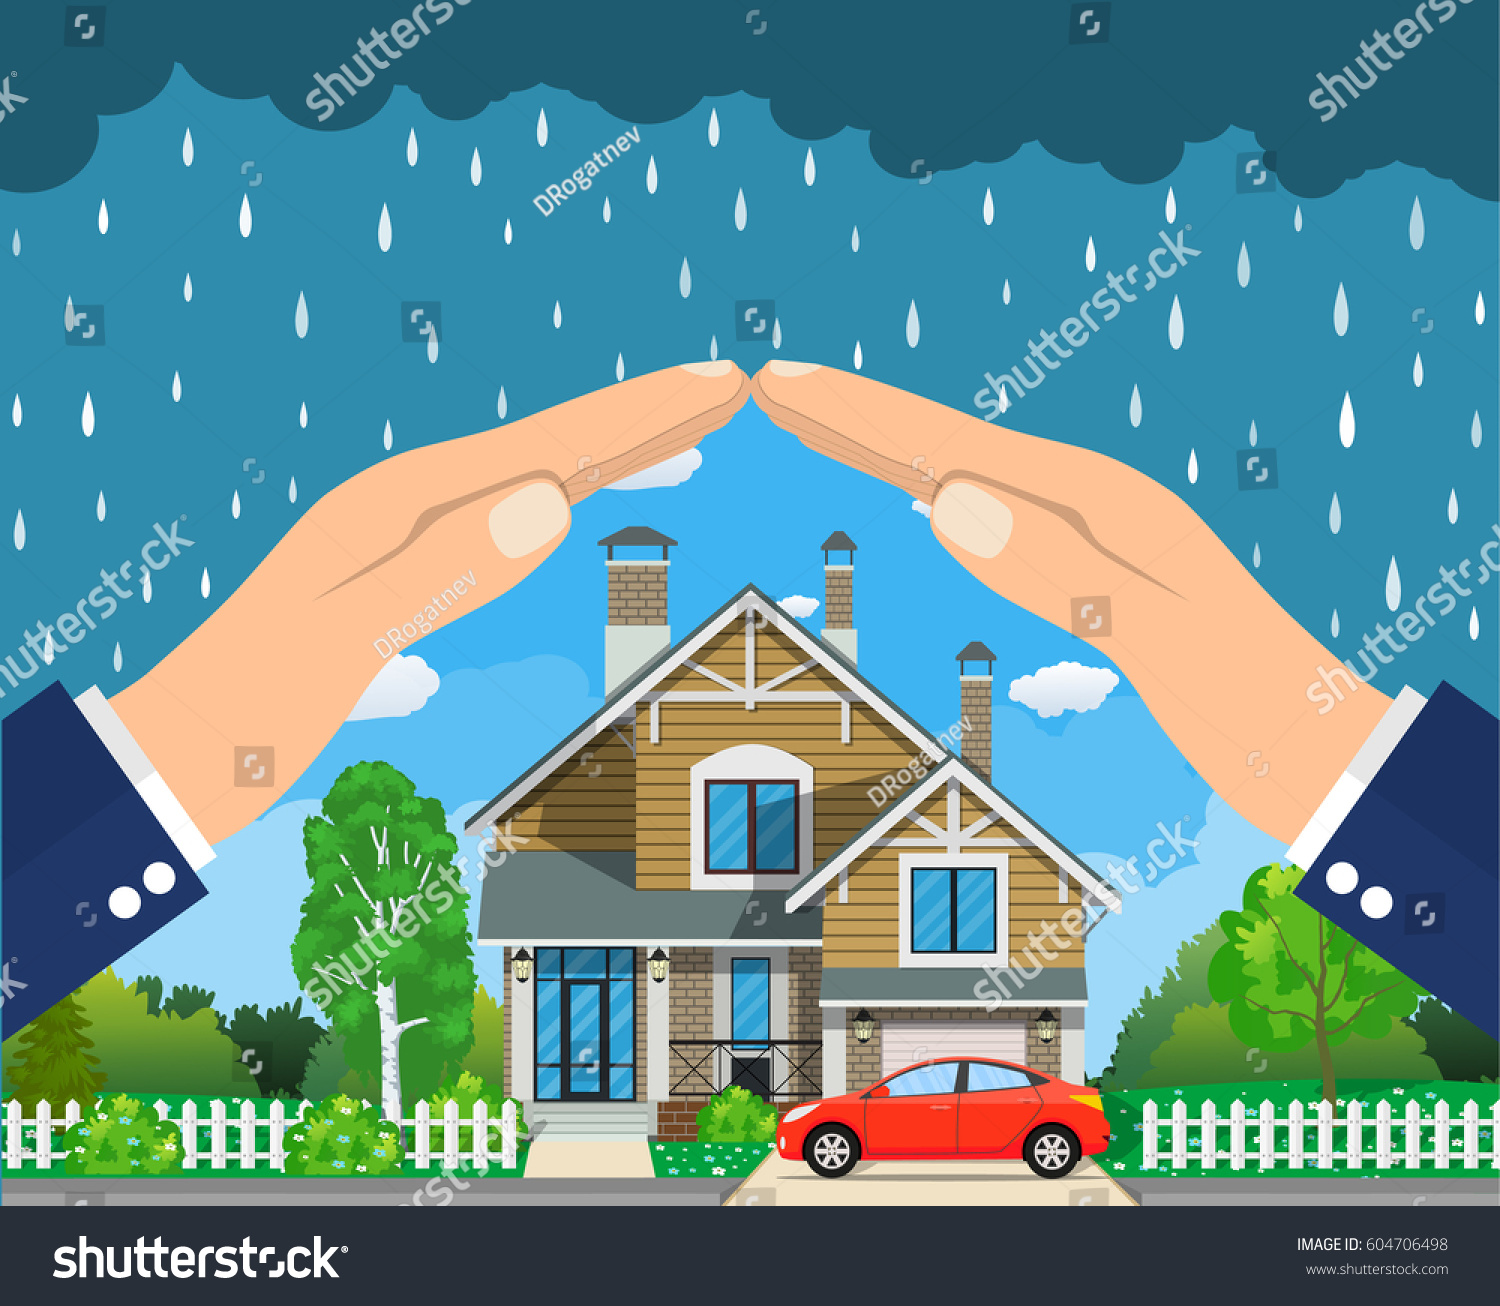 Home Insurance Concept Hands Protecting House Stock Illustration ...